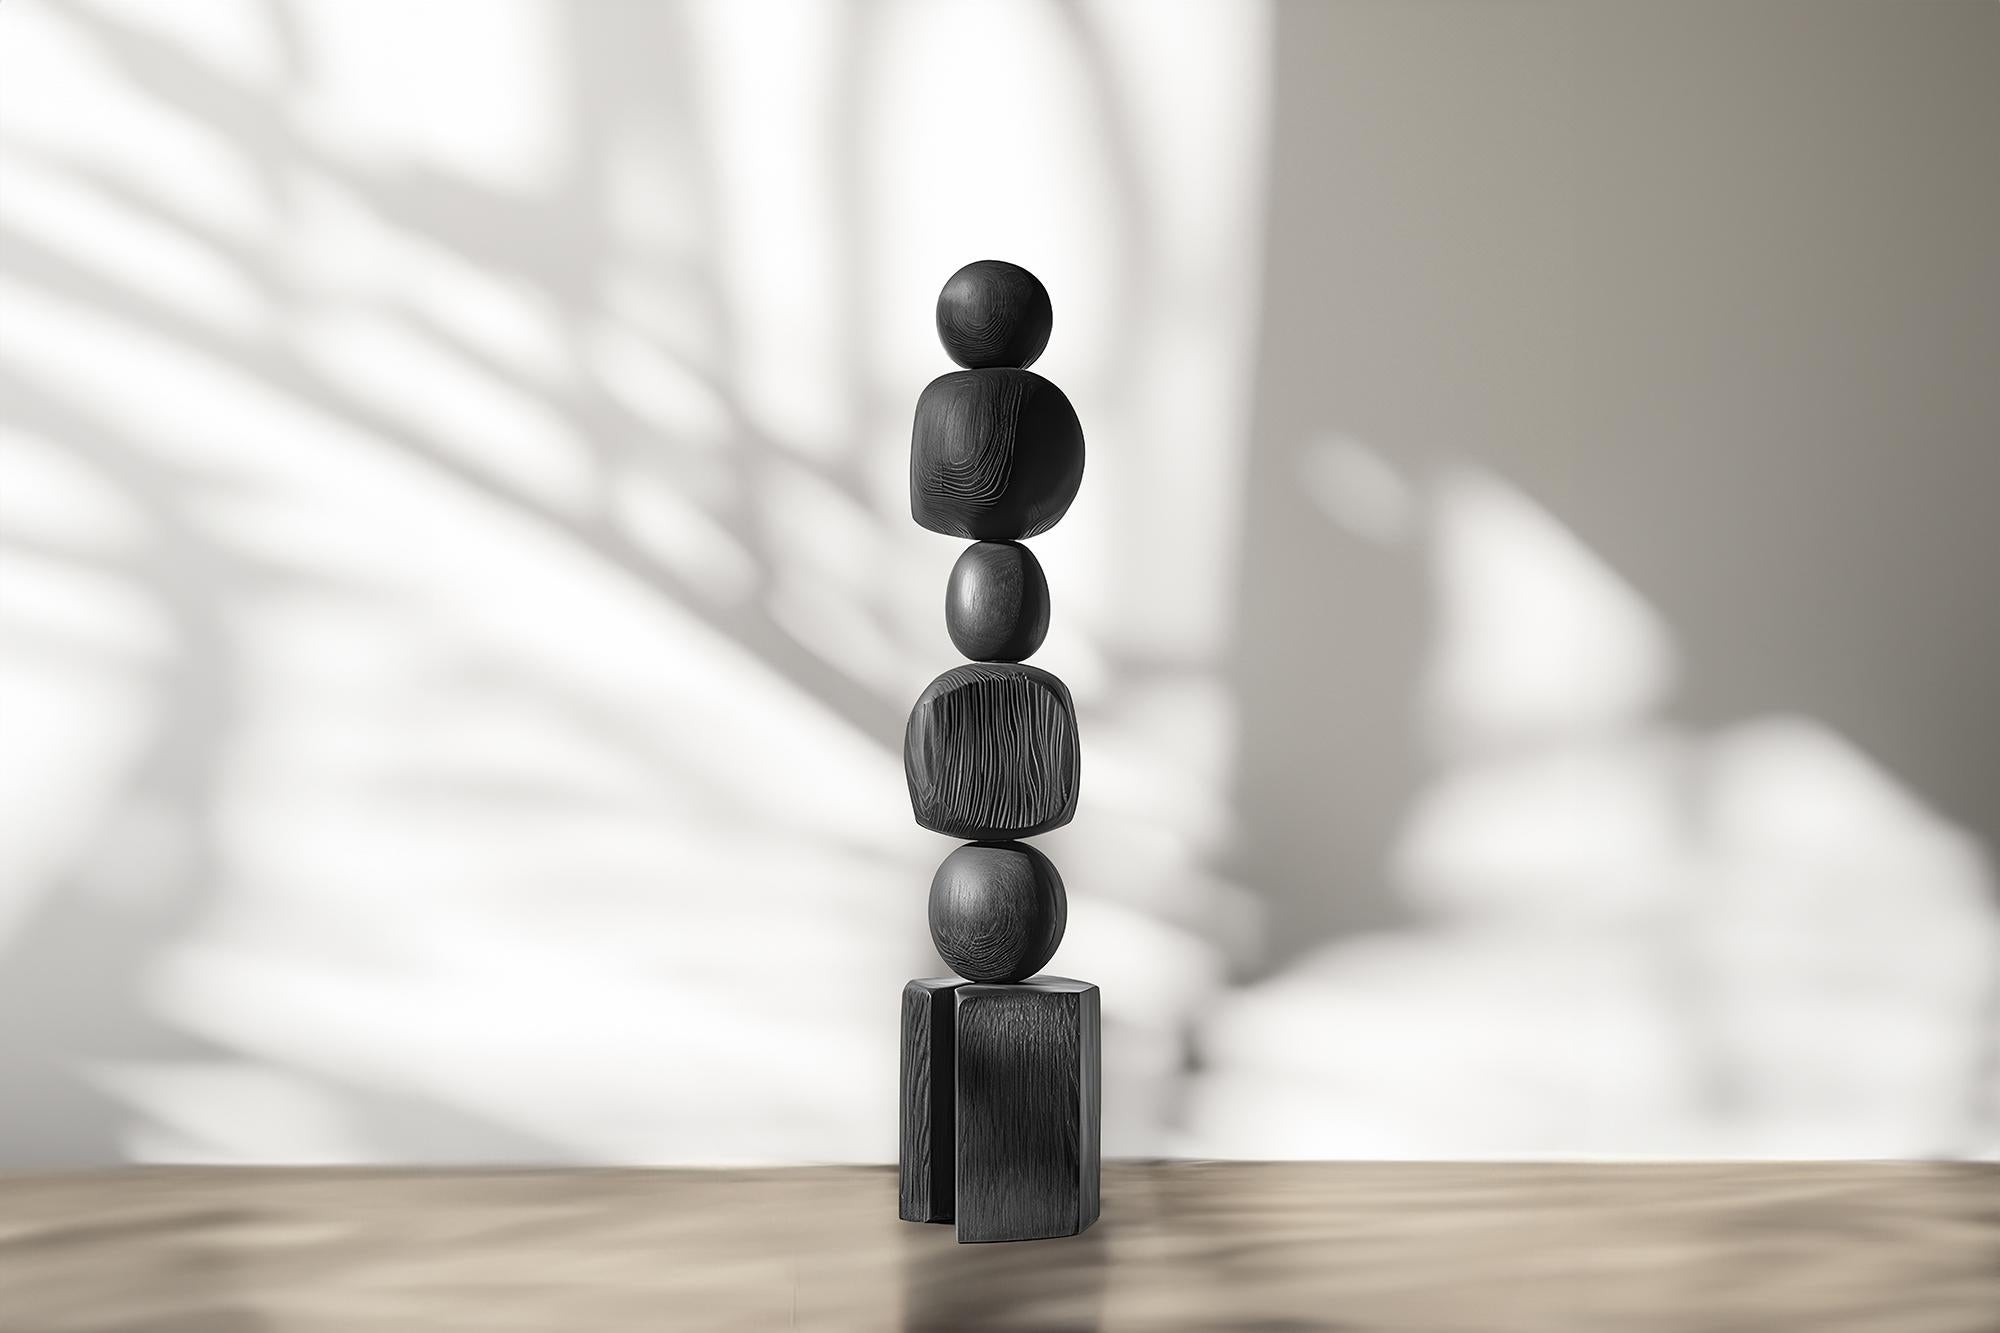 Modern Sculpture in Dark Art, Black Solid Wood by Escalona, Still Stand No94

——

Joel Escalona's wooden standing sculptures are objects of raw beauty and serene grace. Each one is a testament to the power of the material, with smooth curves that